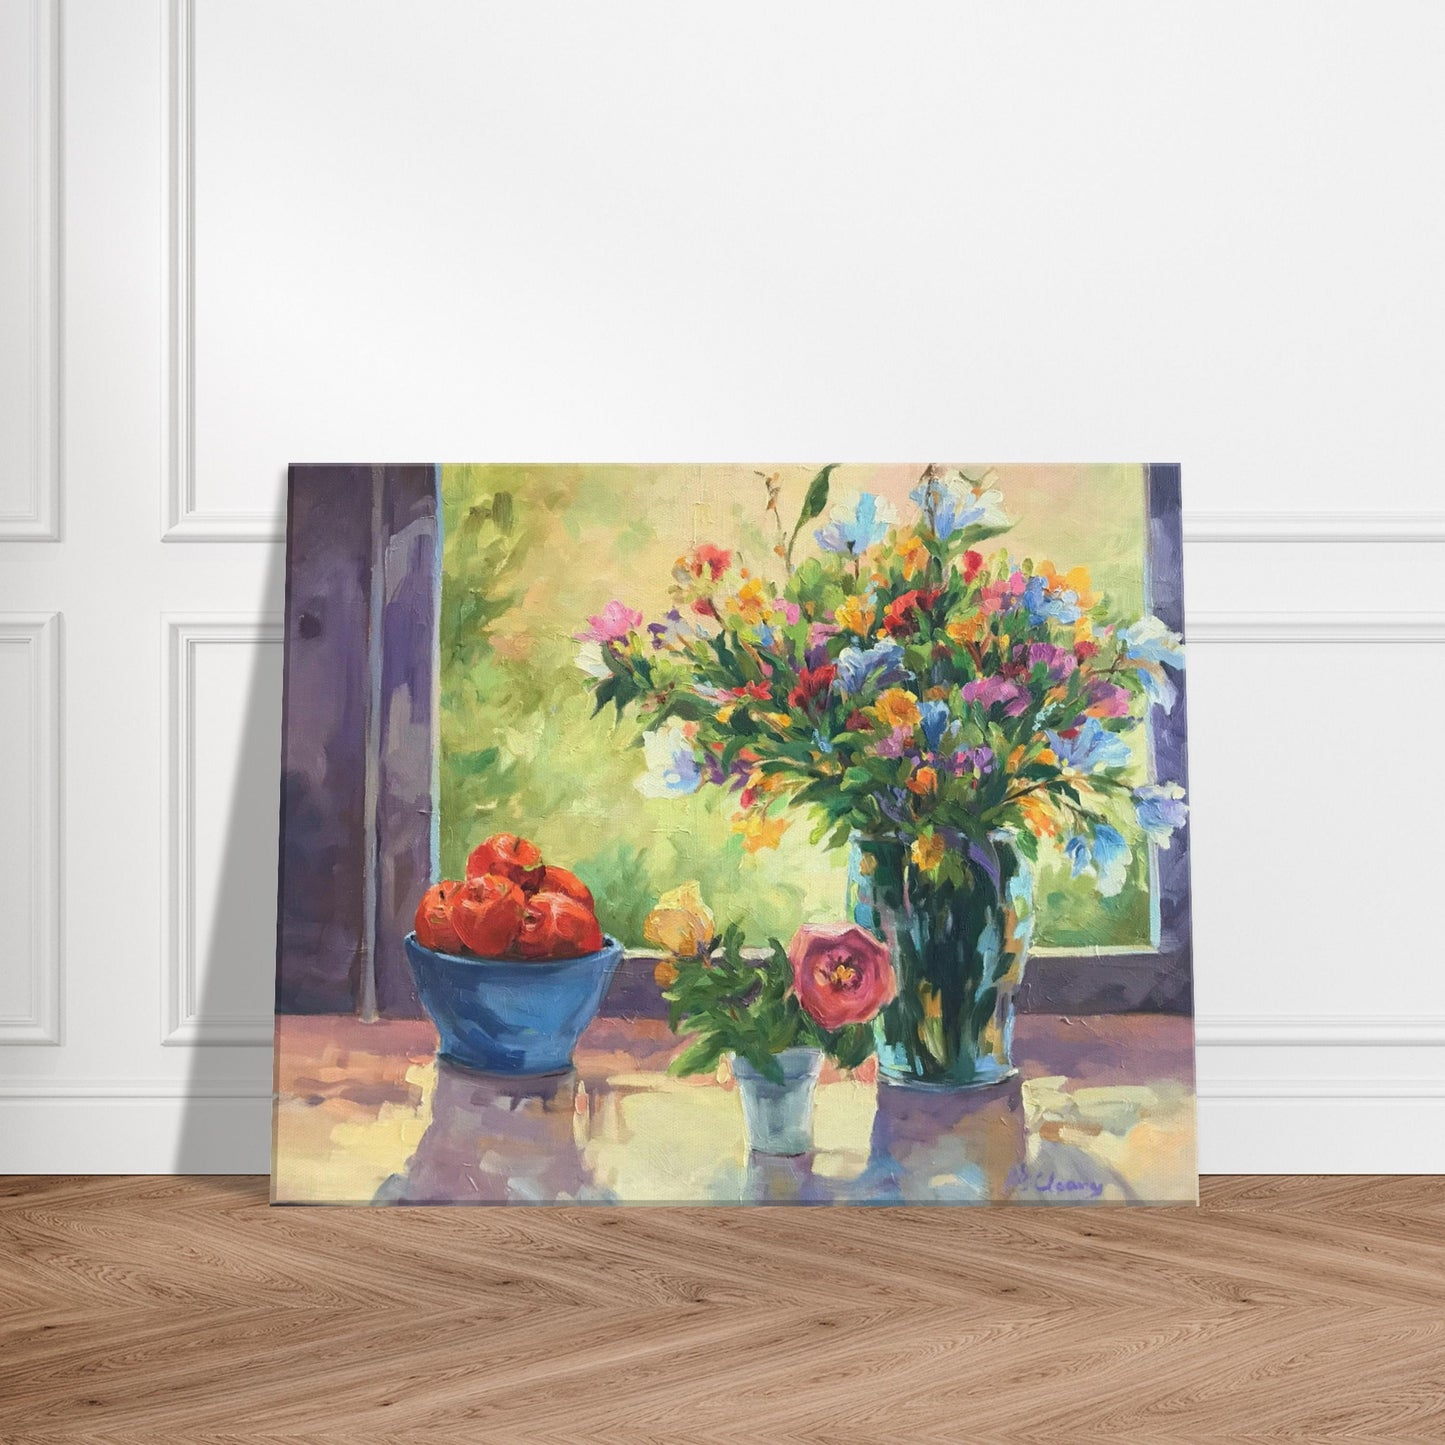 "Myrna's Apples" Floral Print 16x20 inch on Canvas Barbara Cleary Designs